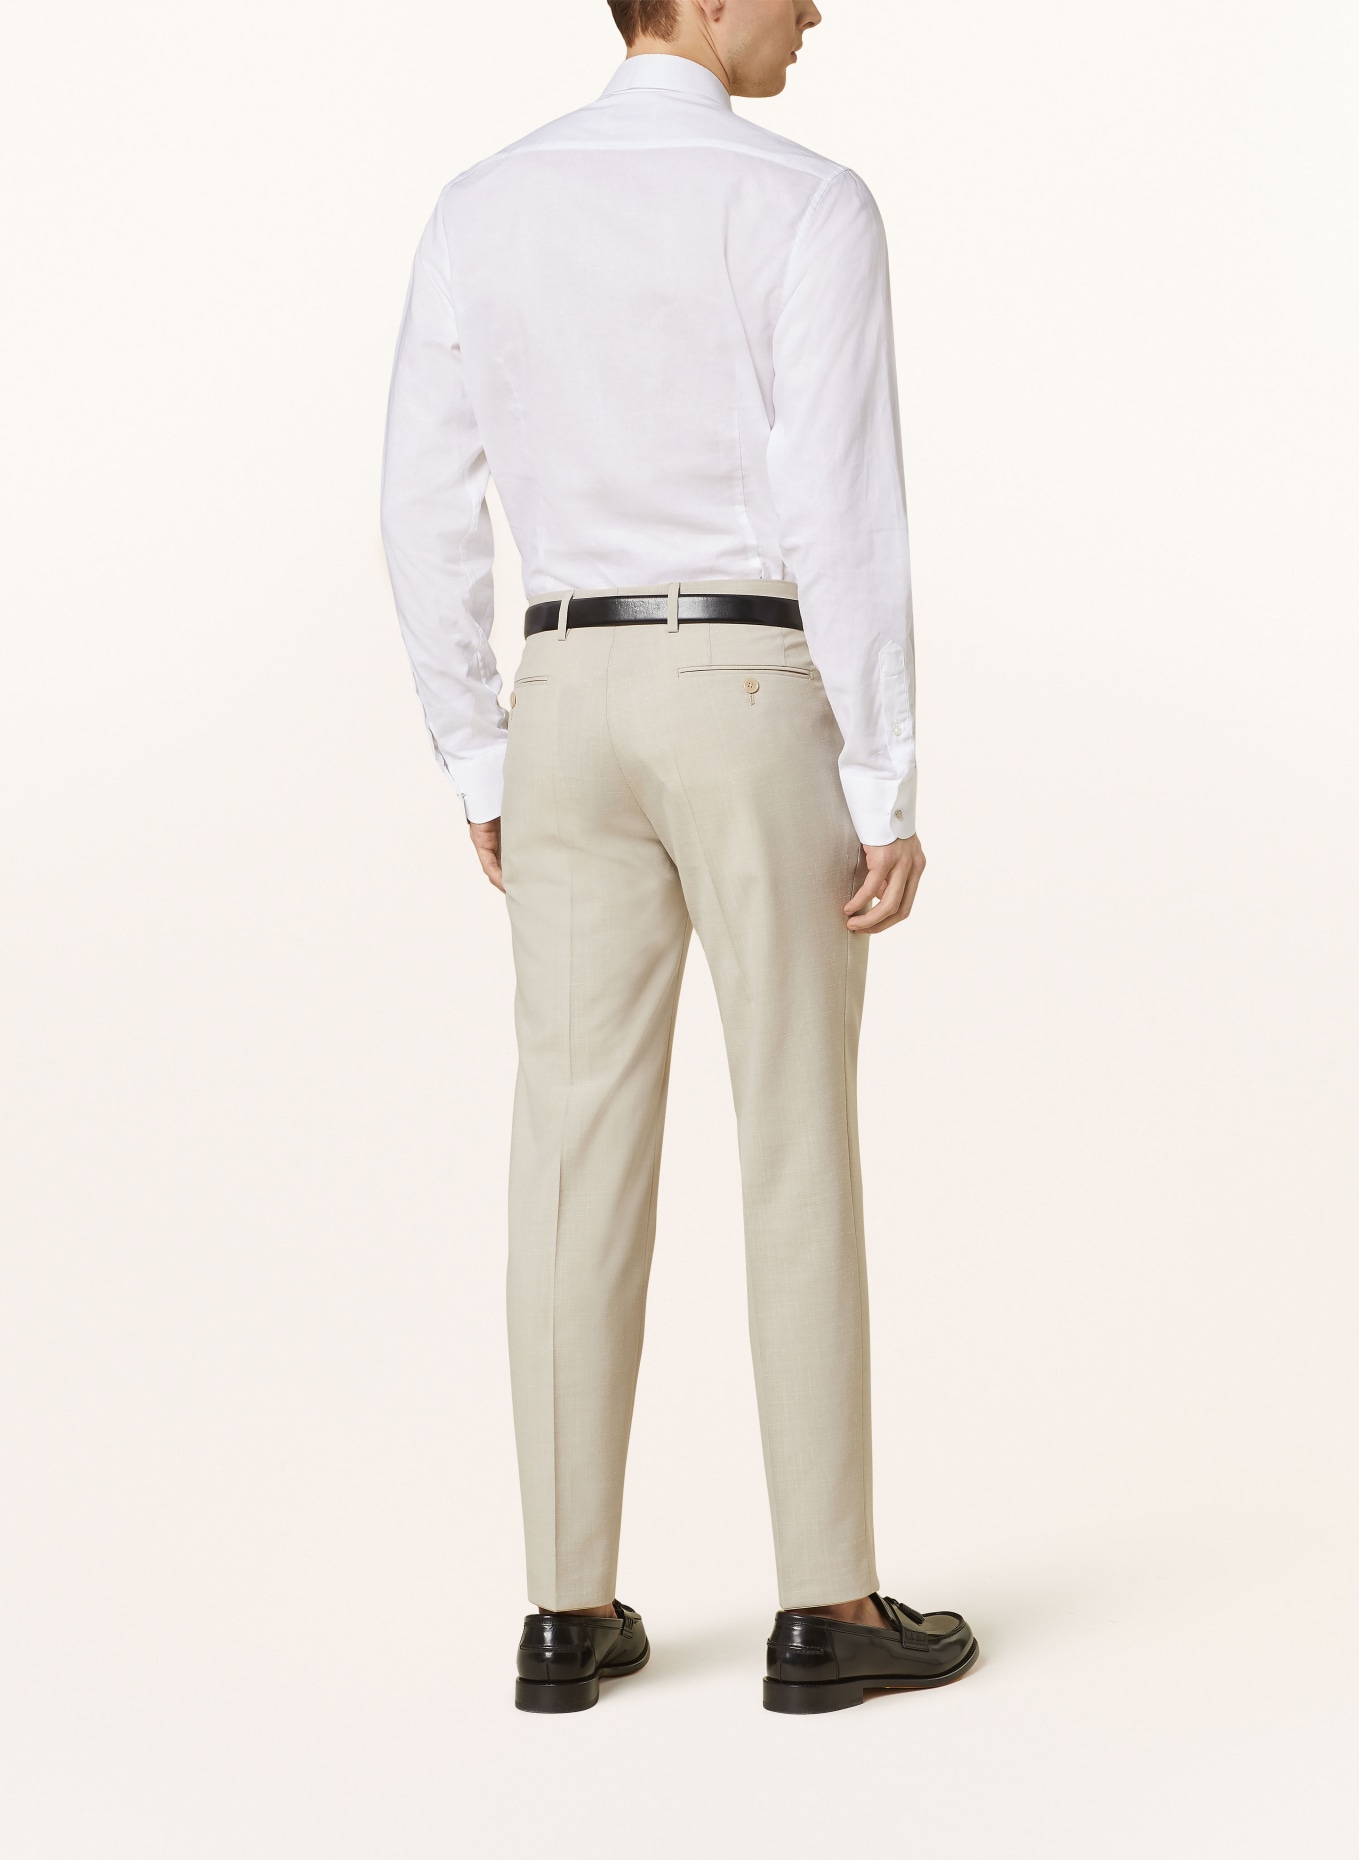 CG - CLUB of GENTS Shirt PLUTO slim fit with linen and detachable collar, Color: WHITE (Image 3)